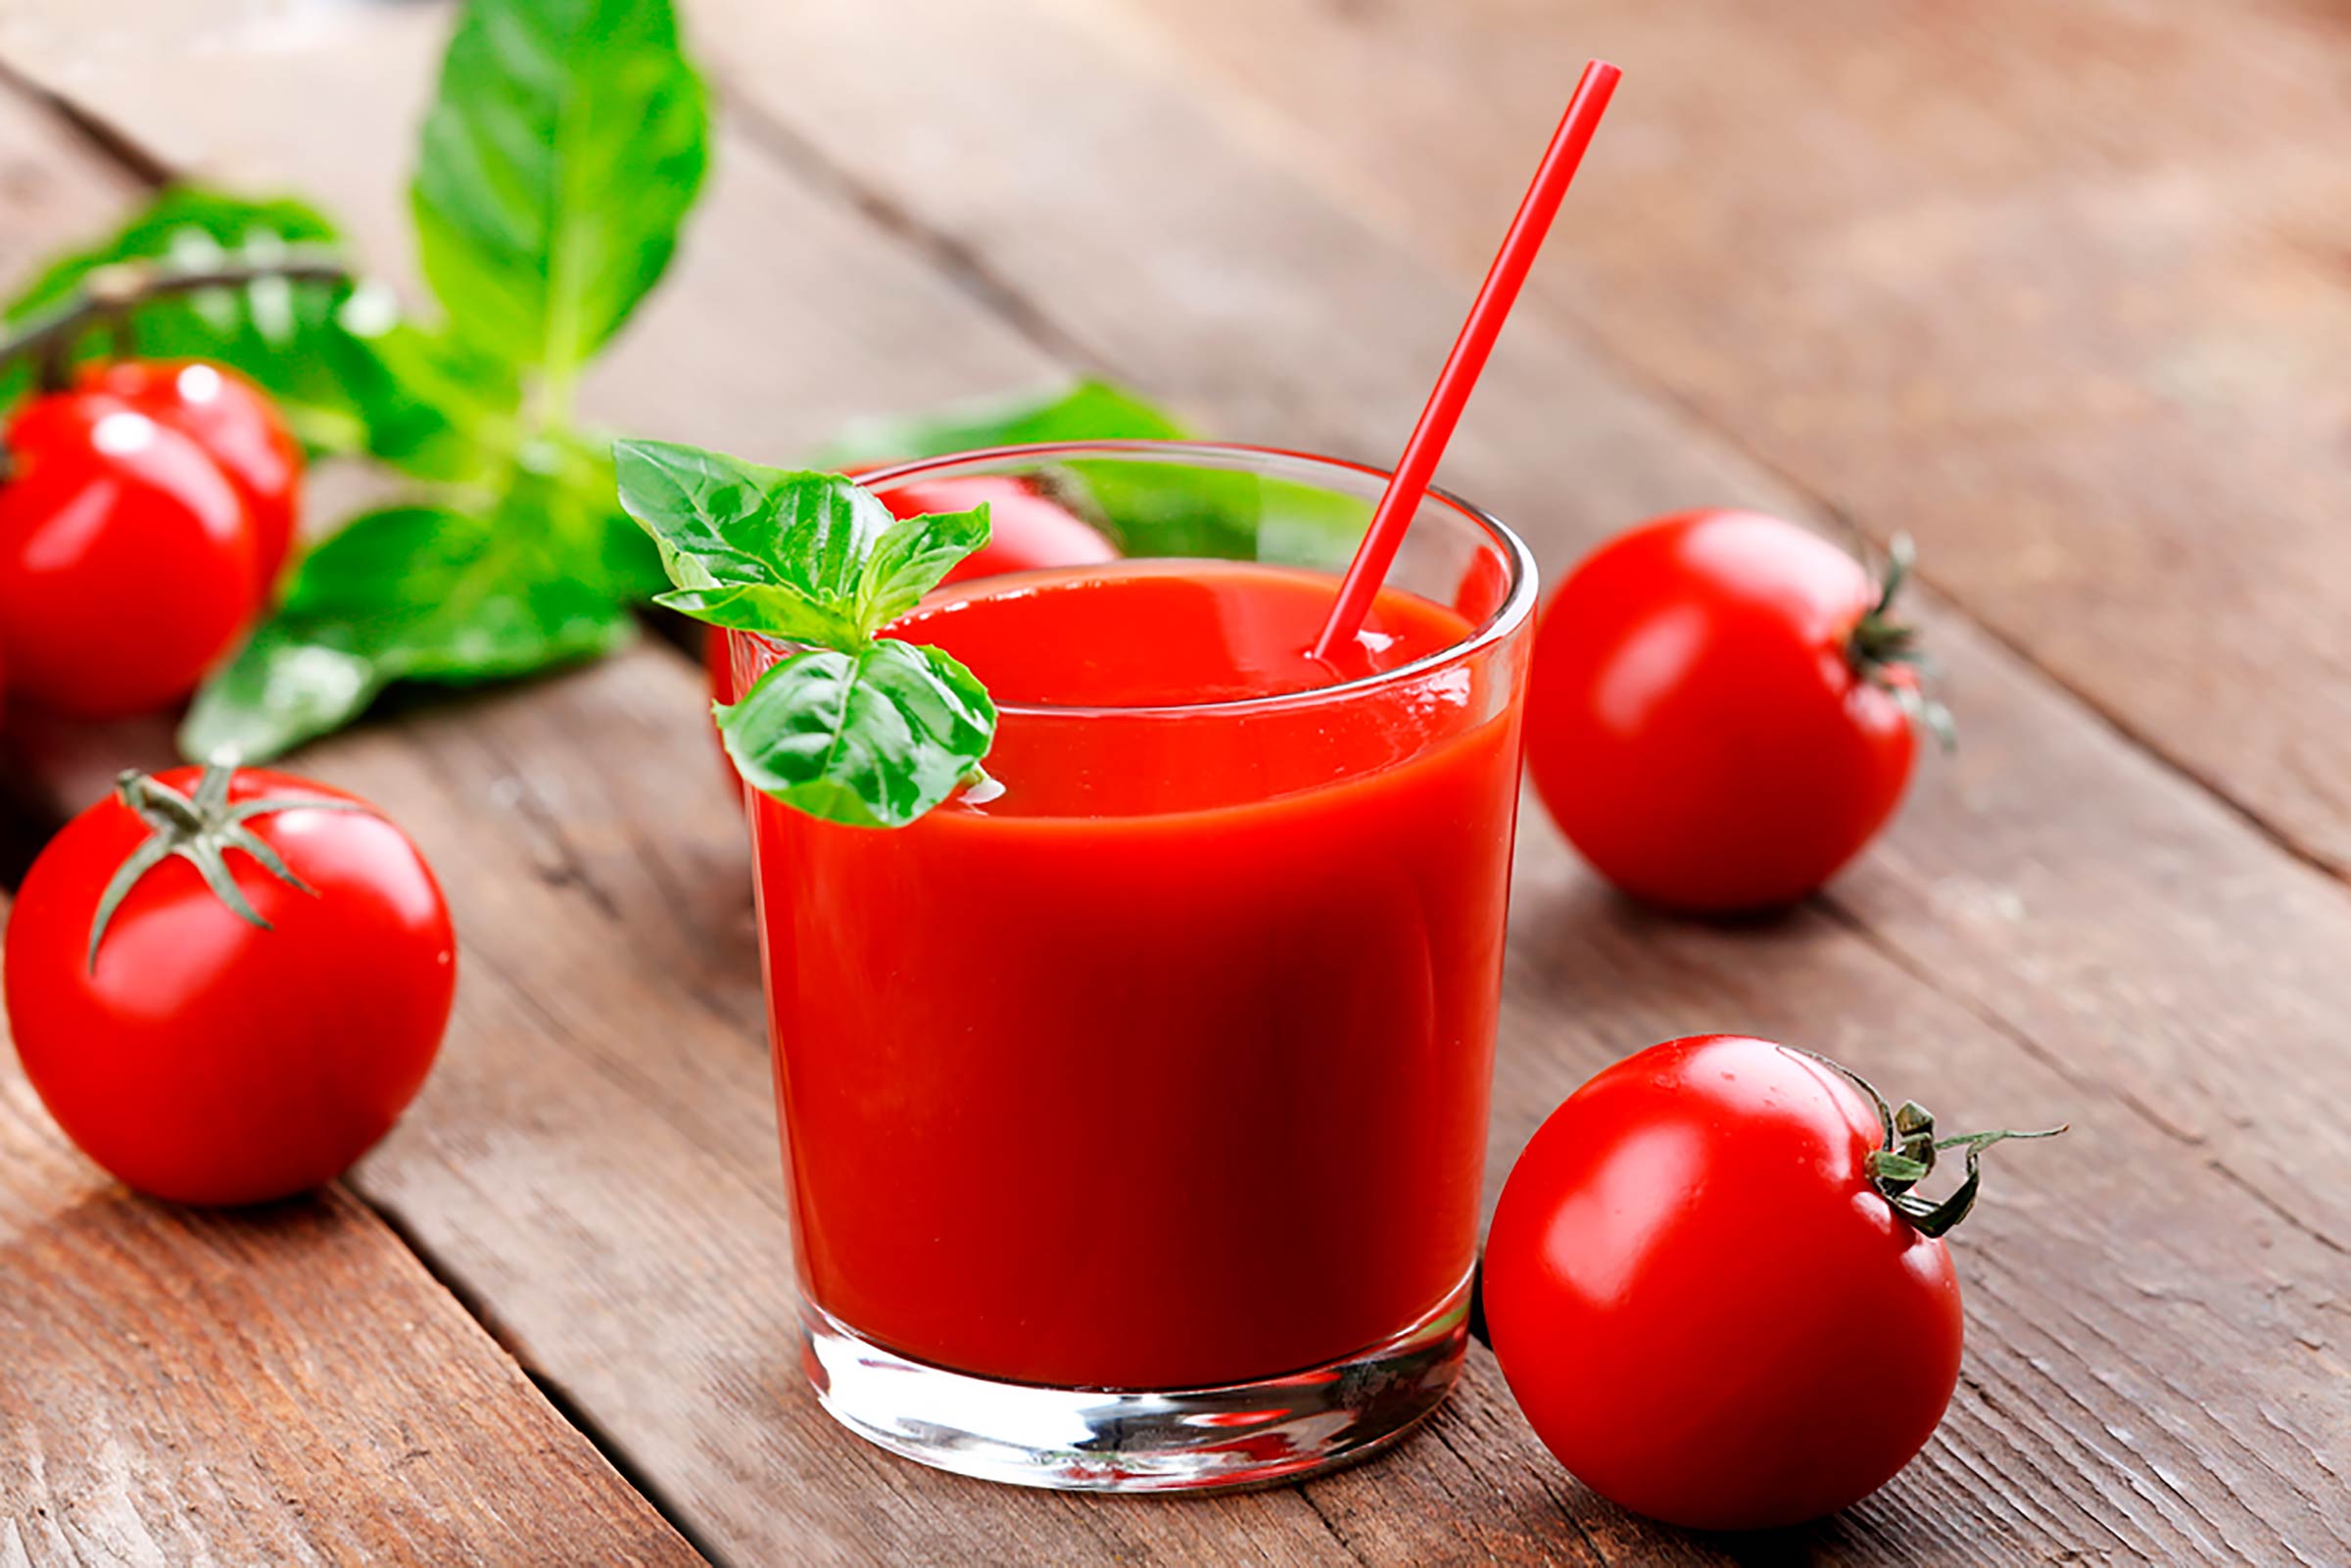 Benefits of tomato juice for your heart